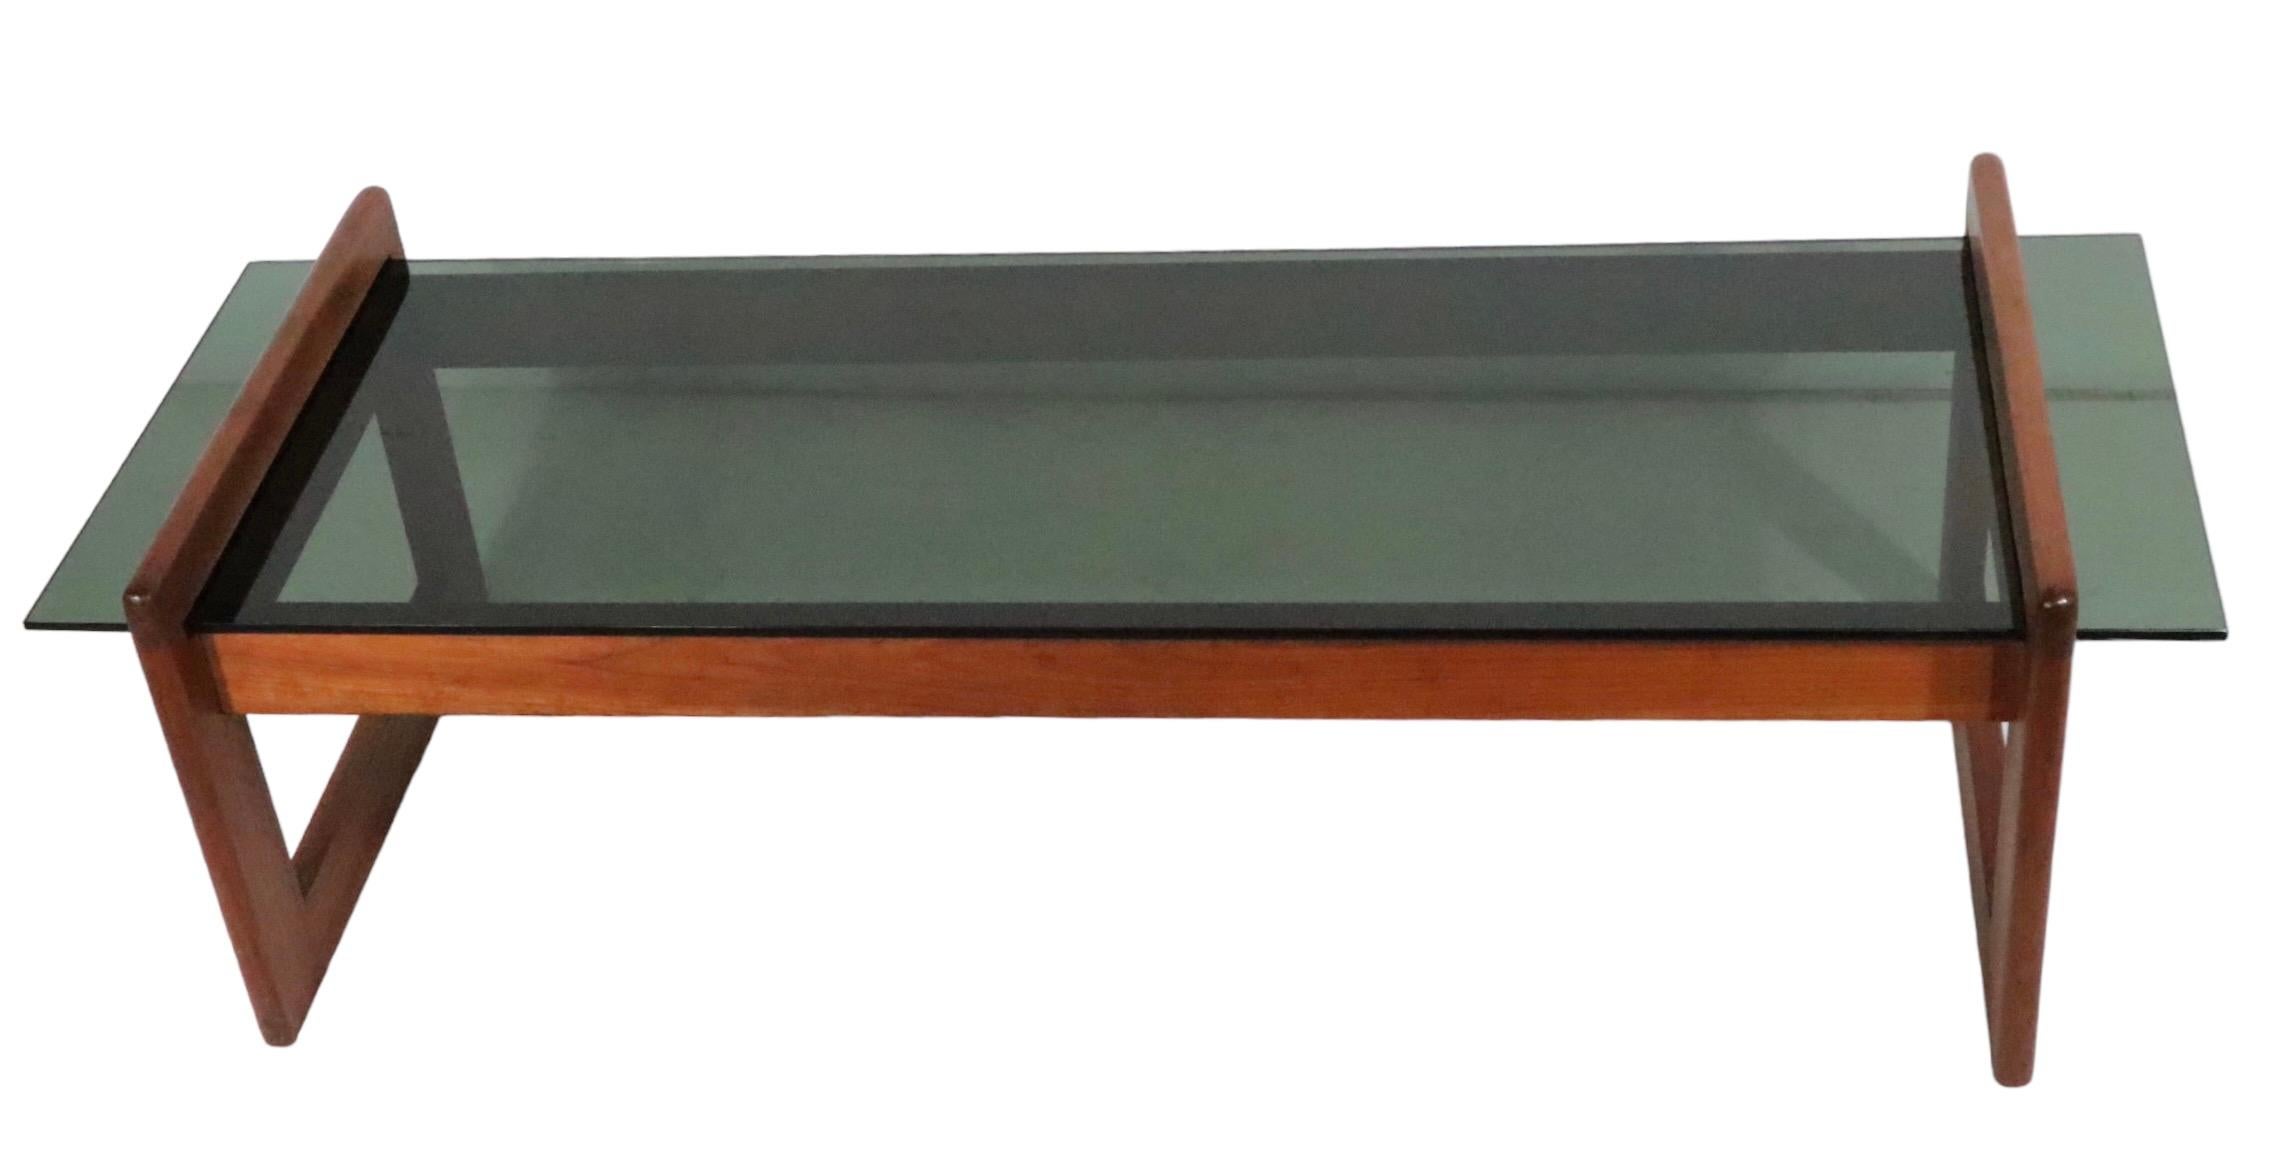 Mid Century Wood and Glass Coffee Table Designed by Adrian Pearsall c 1970's For Sale 10